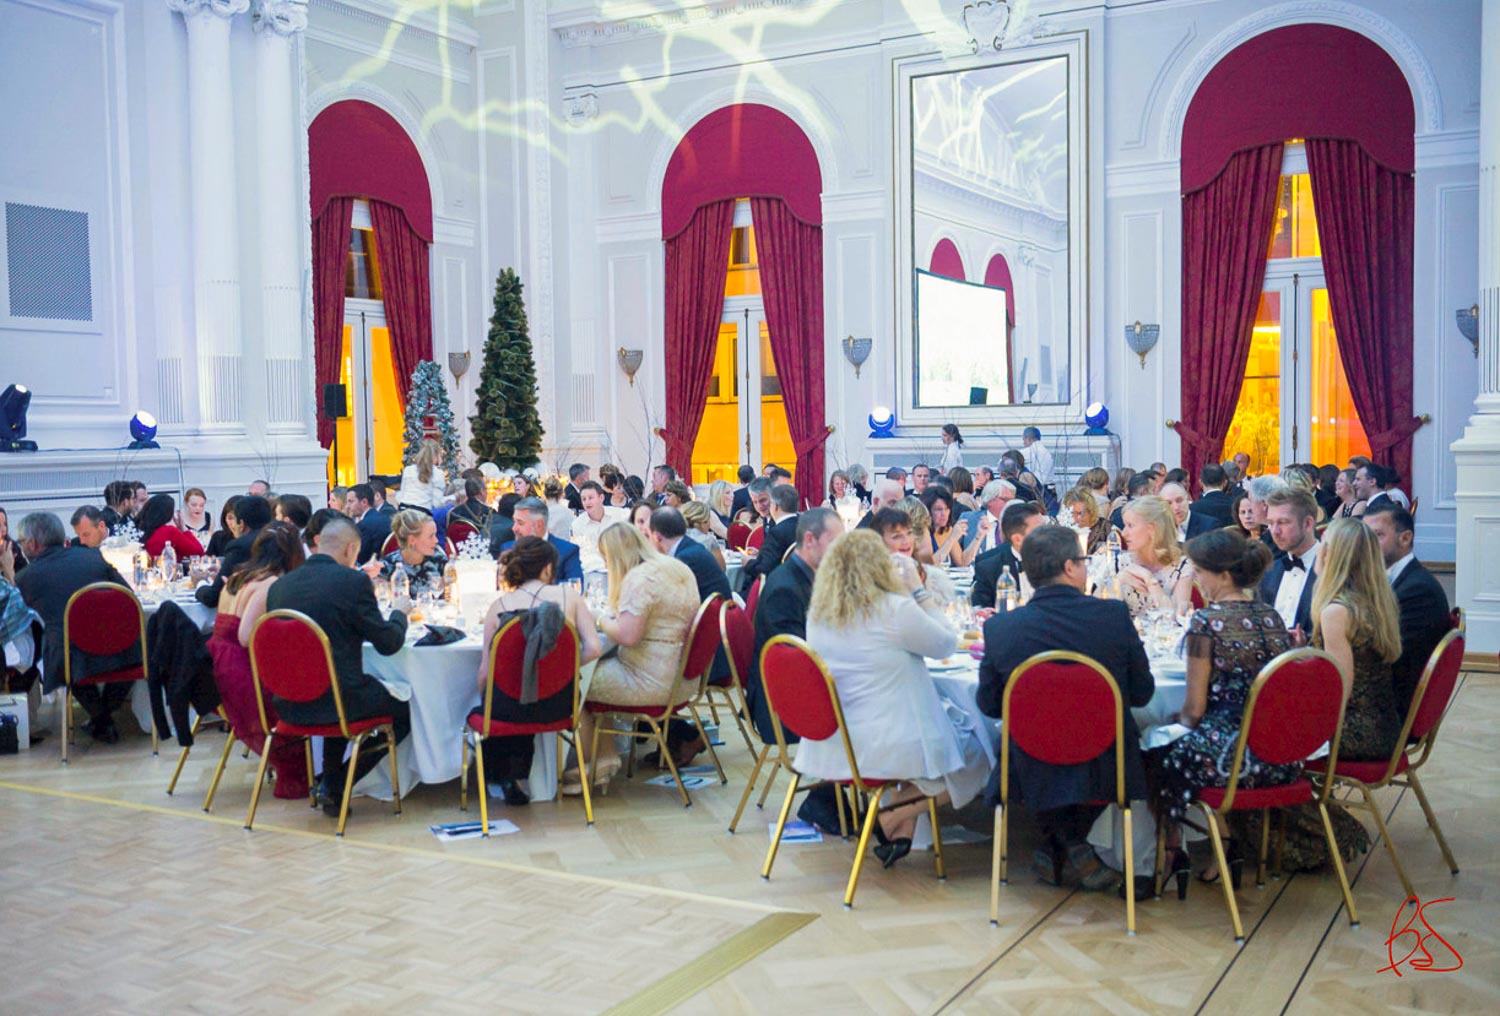 Make-A-Wish Luxembourg Winter Wonderland Gala and Auction 2016 at Cercle Cité in Luxembourg City